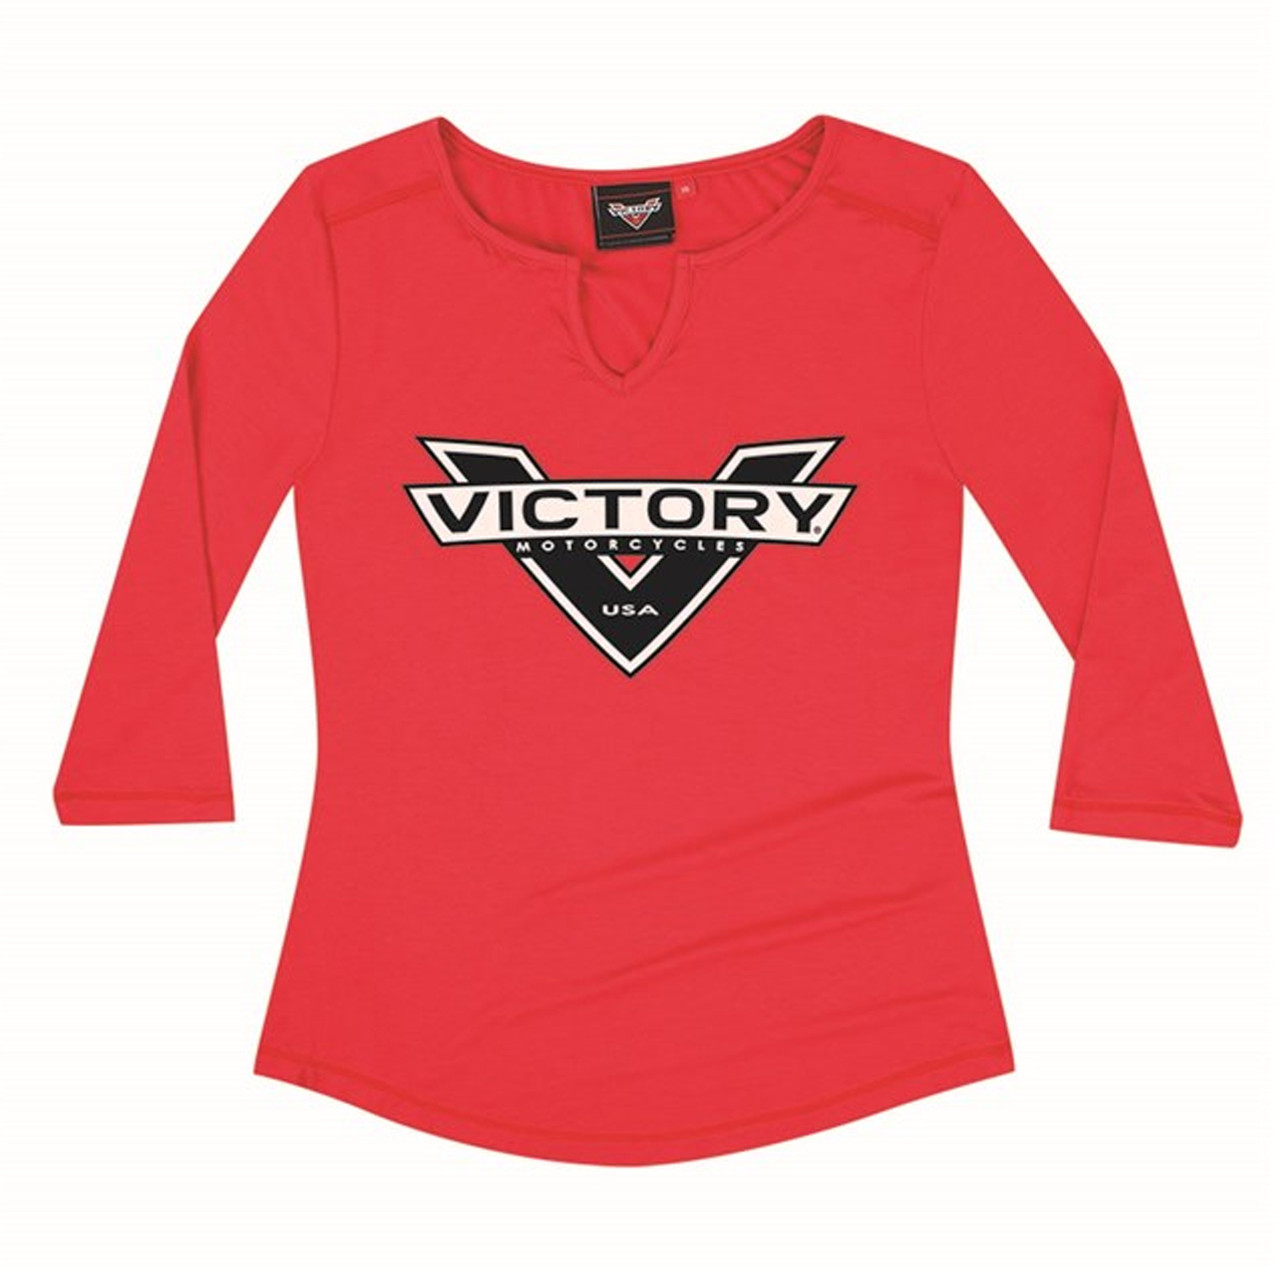 Victory Motorcycle New OEM Women's Red Badge 3 QTR Sleeve Shirt, Small, 28679850